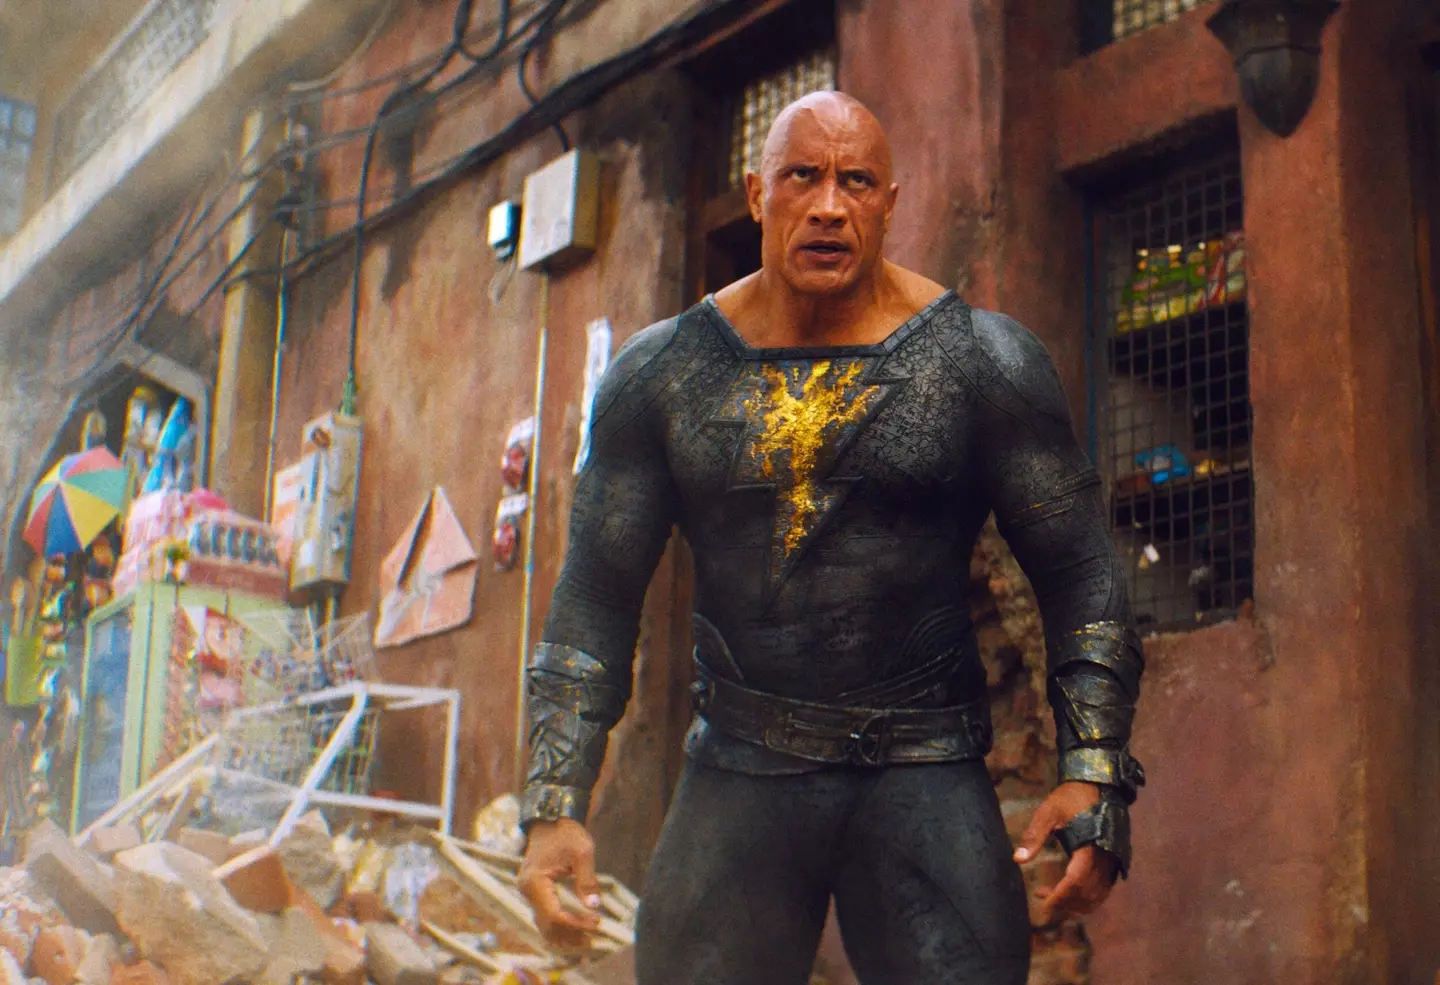 Black Adam is the twelfth film of the DC Extended Universe.